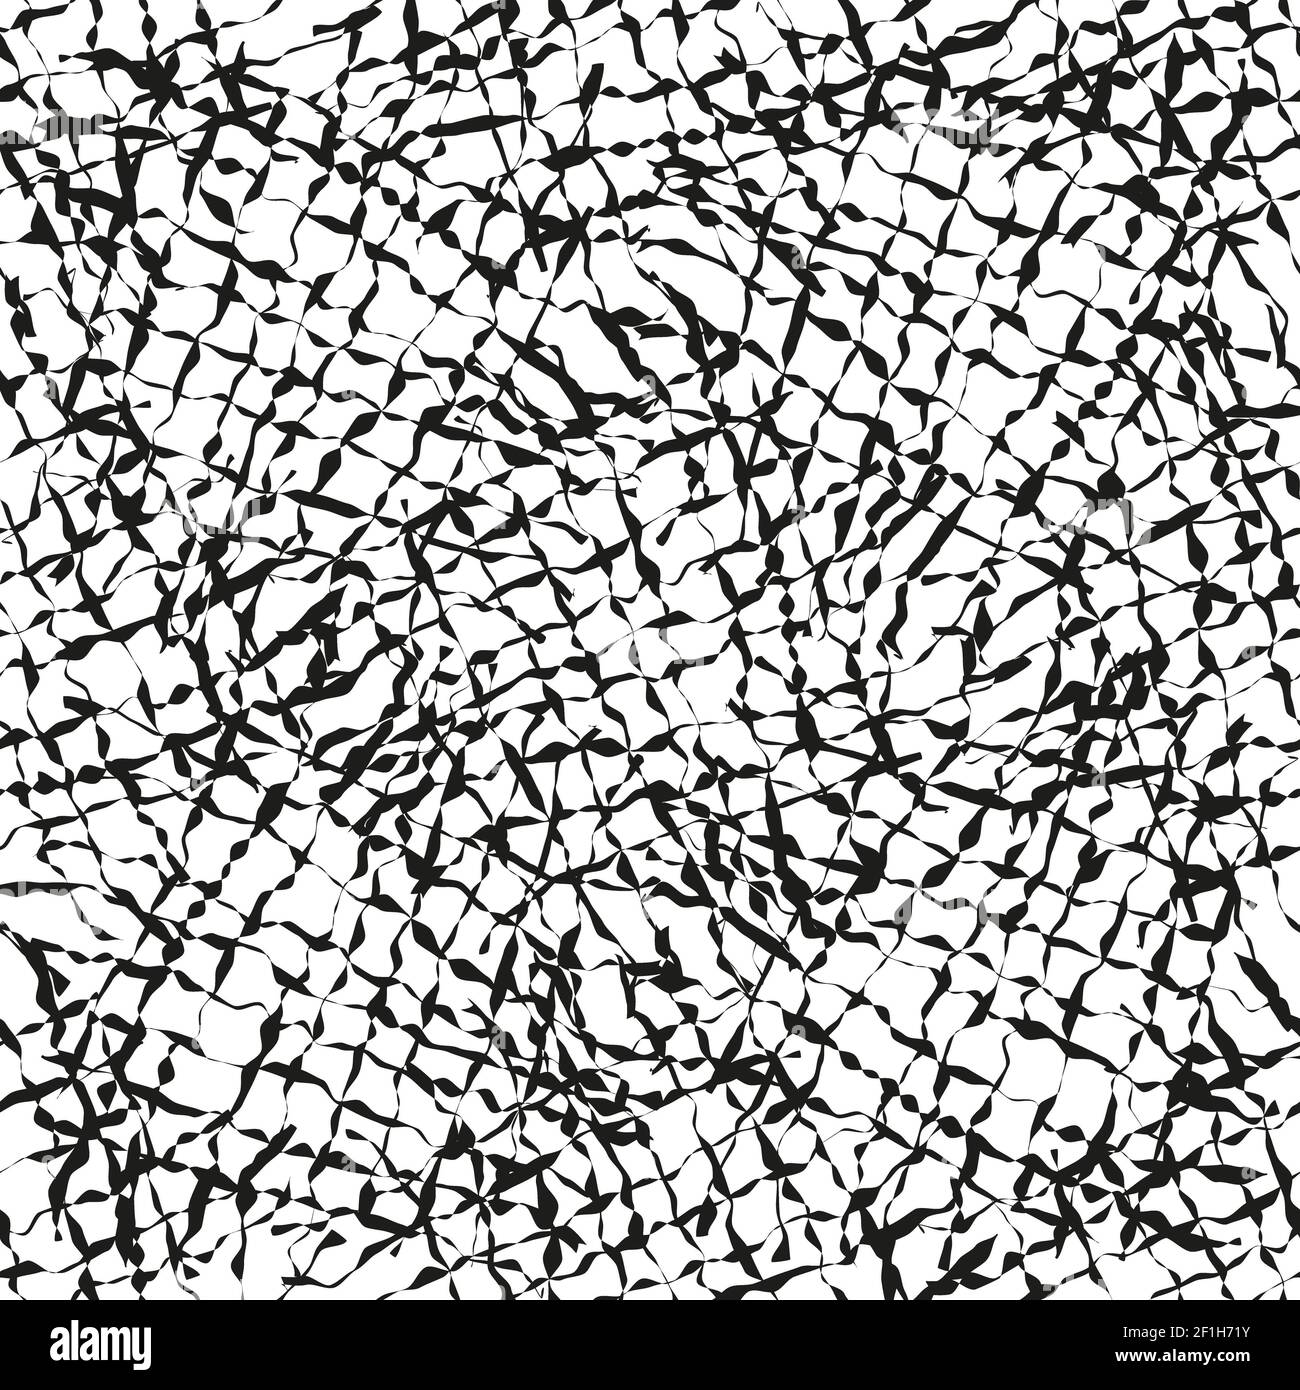 Abstract black and white net seamless background Stock Photo